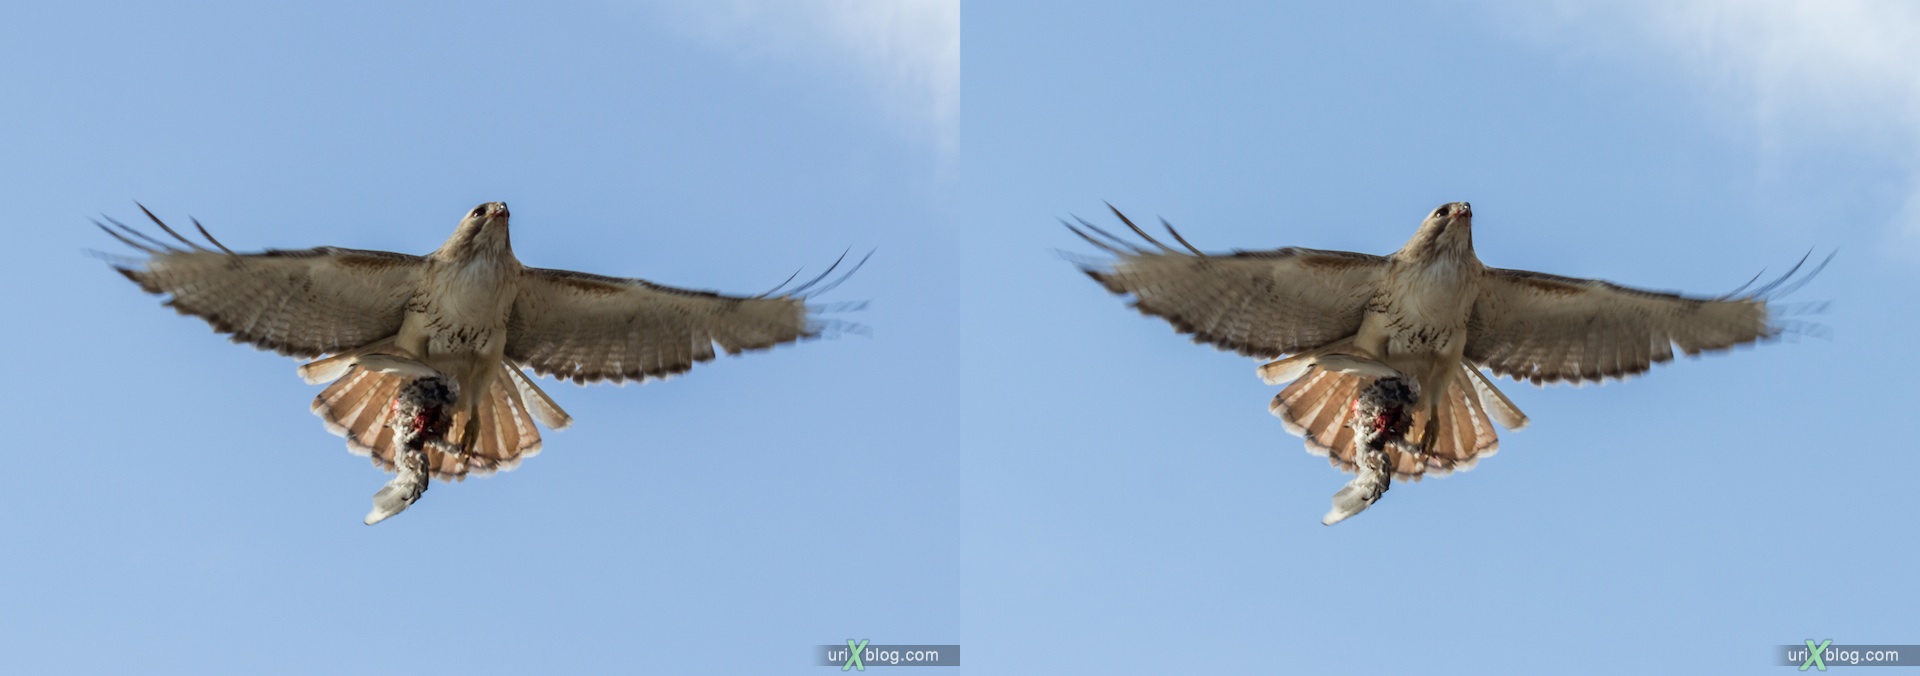 2013, red-tailed hawk, eagle, bird, NYC, New York, Manhattan, USA, 3D, stereo pair, cross-eyed, crossview, cross view stereo pair, stereoscopic